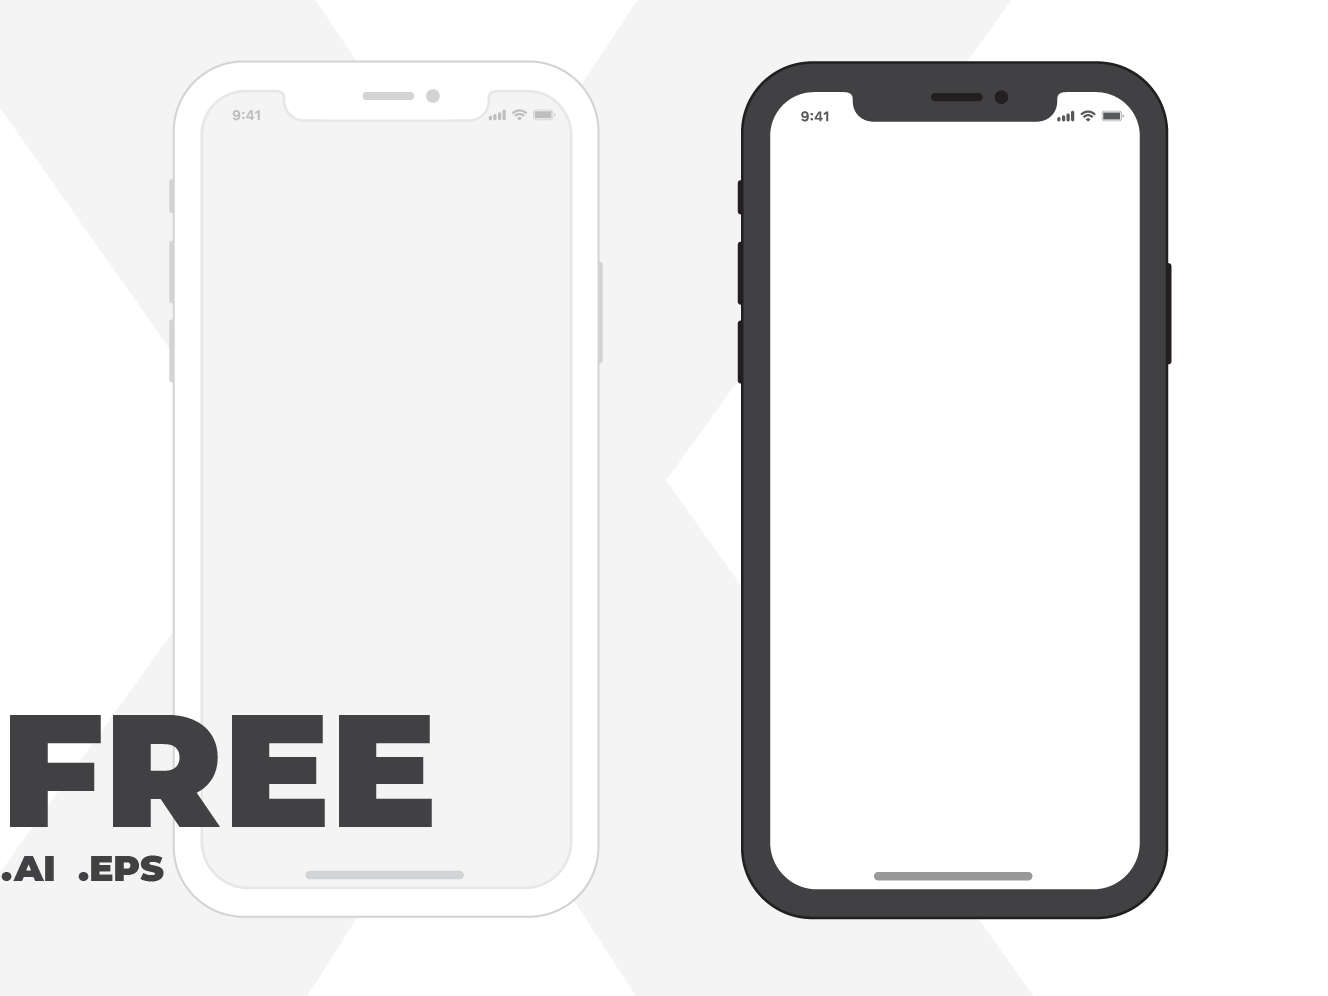 Download iPhone X free mockup by Yulko on Dribbble